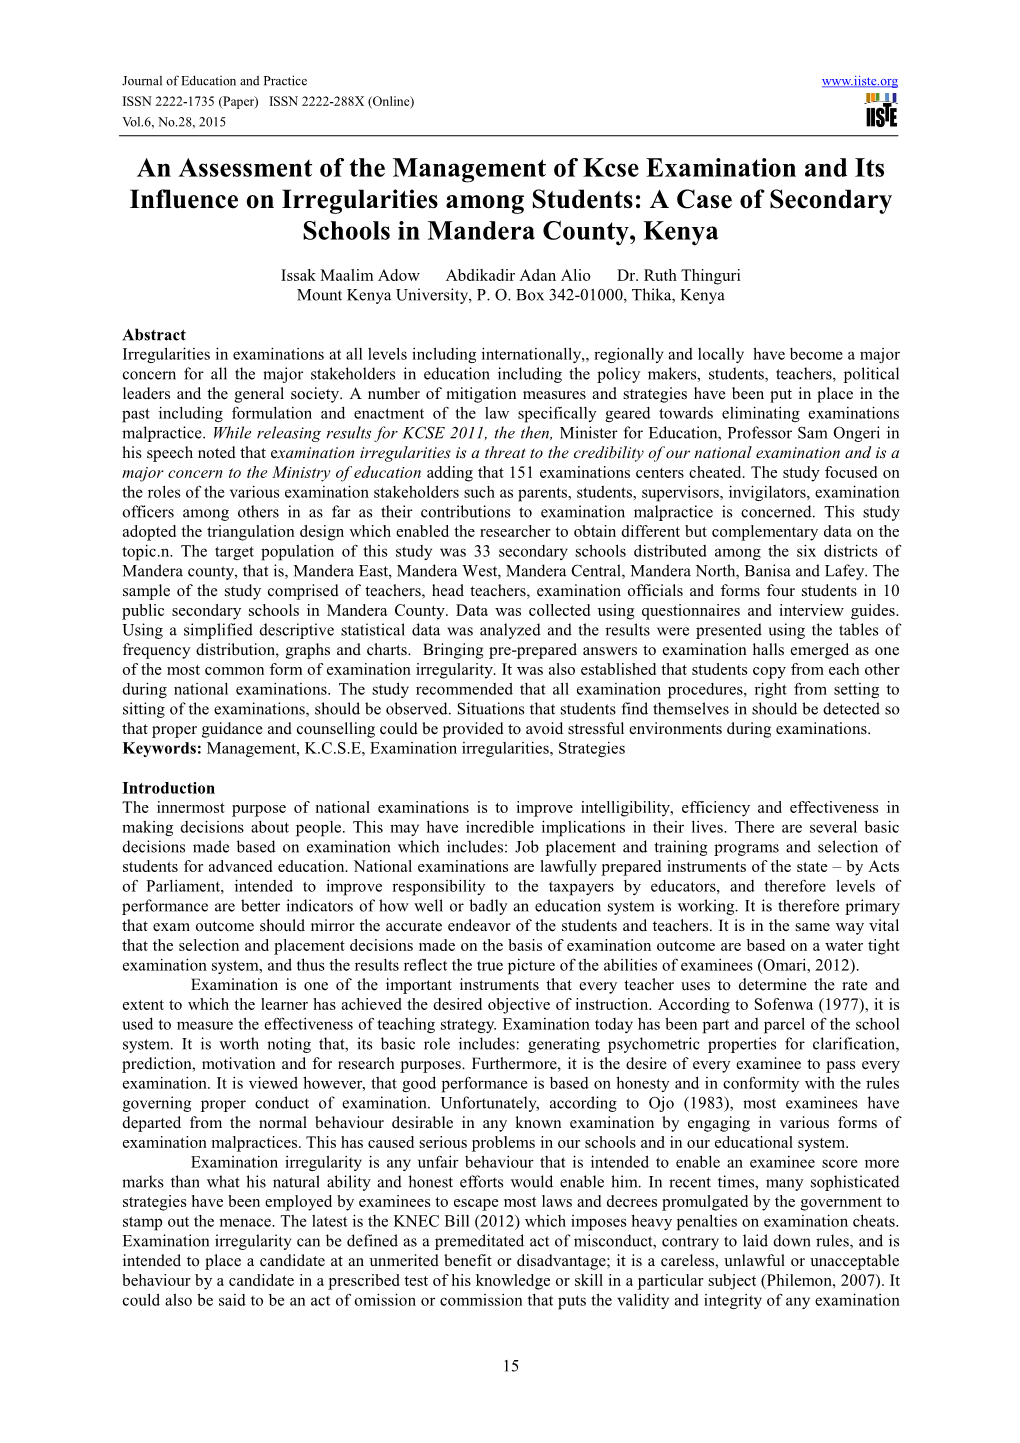 An Assessment of the Management of Kcse Examination and Its Influence on Irregularities Among Students: a Case of Secondary Schools in Mandera County, Kenya